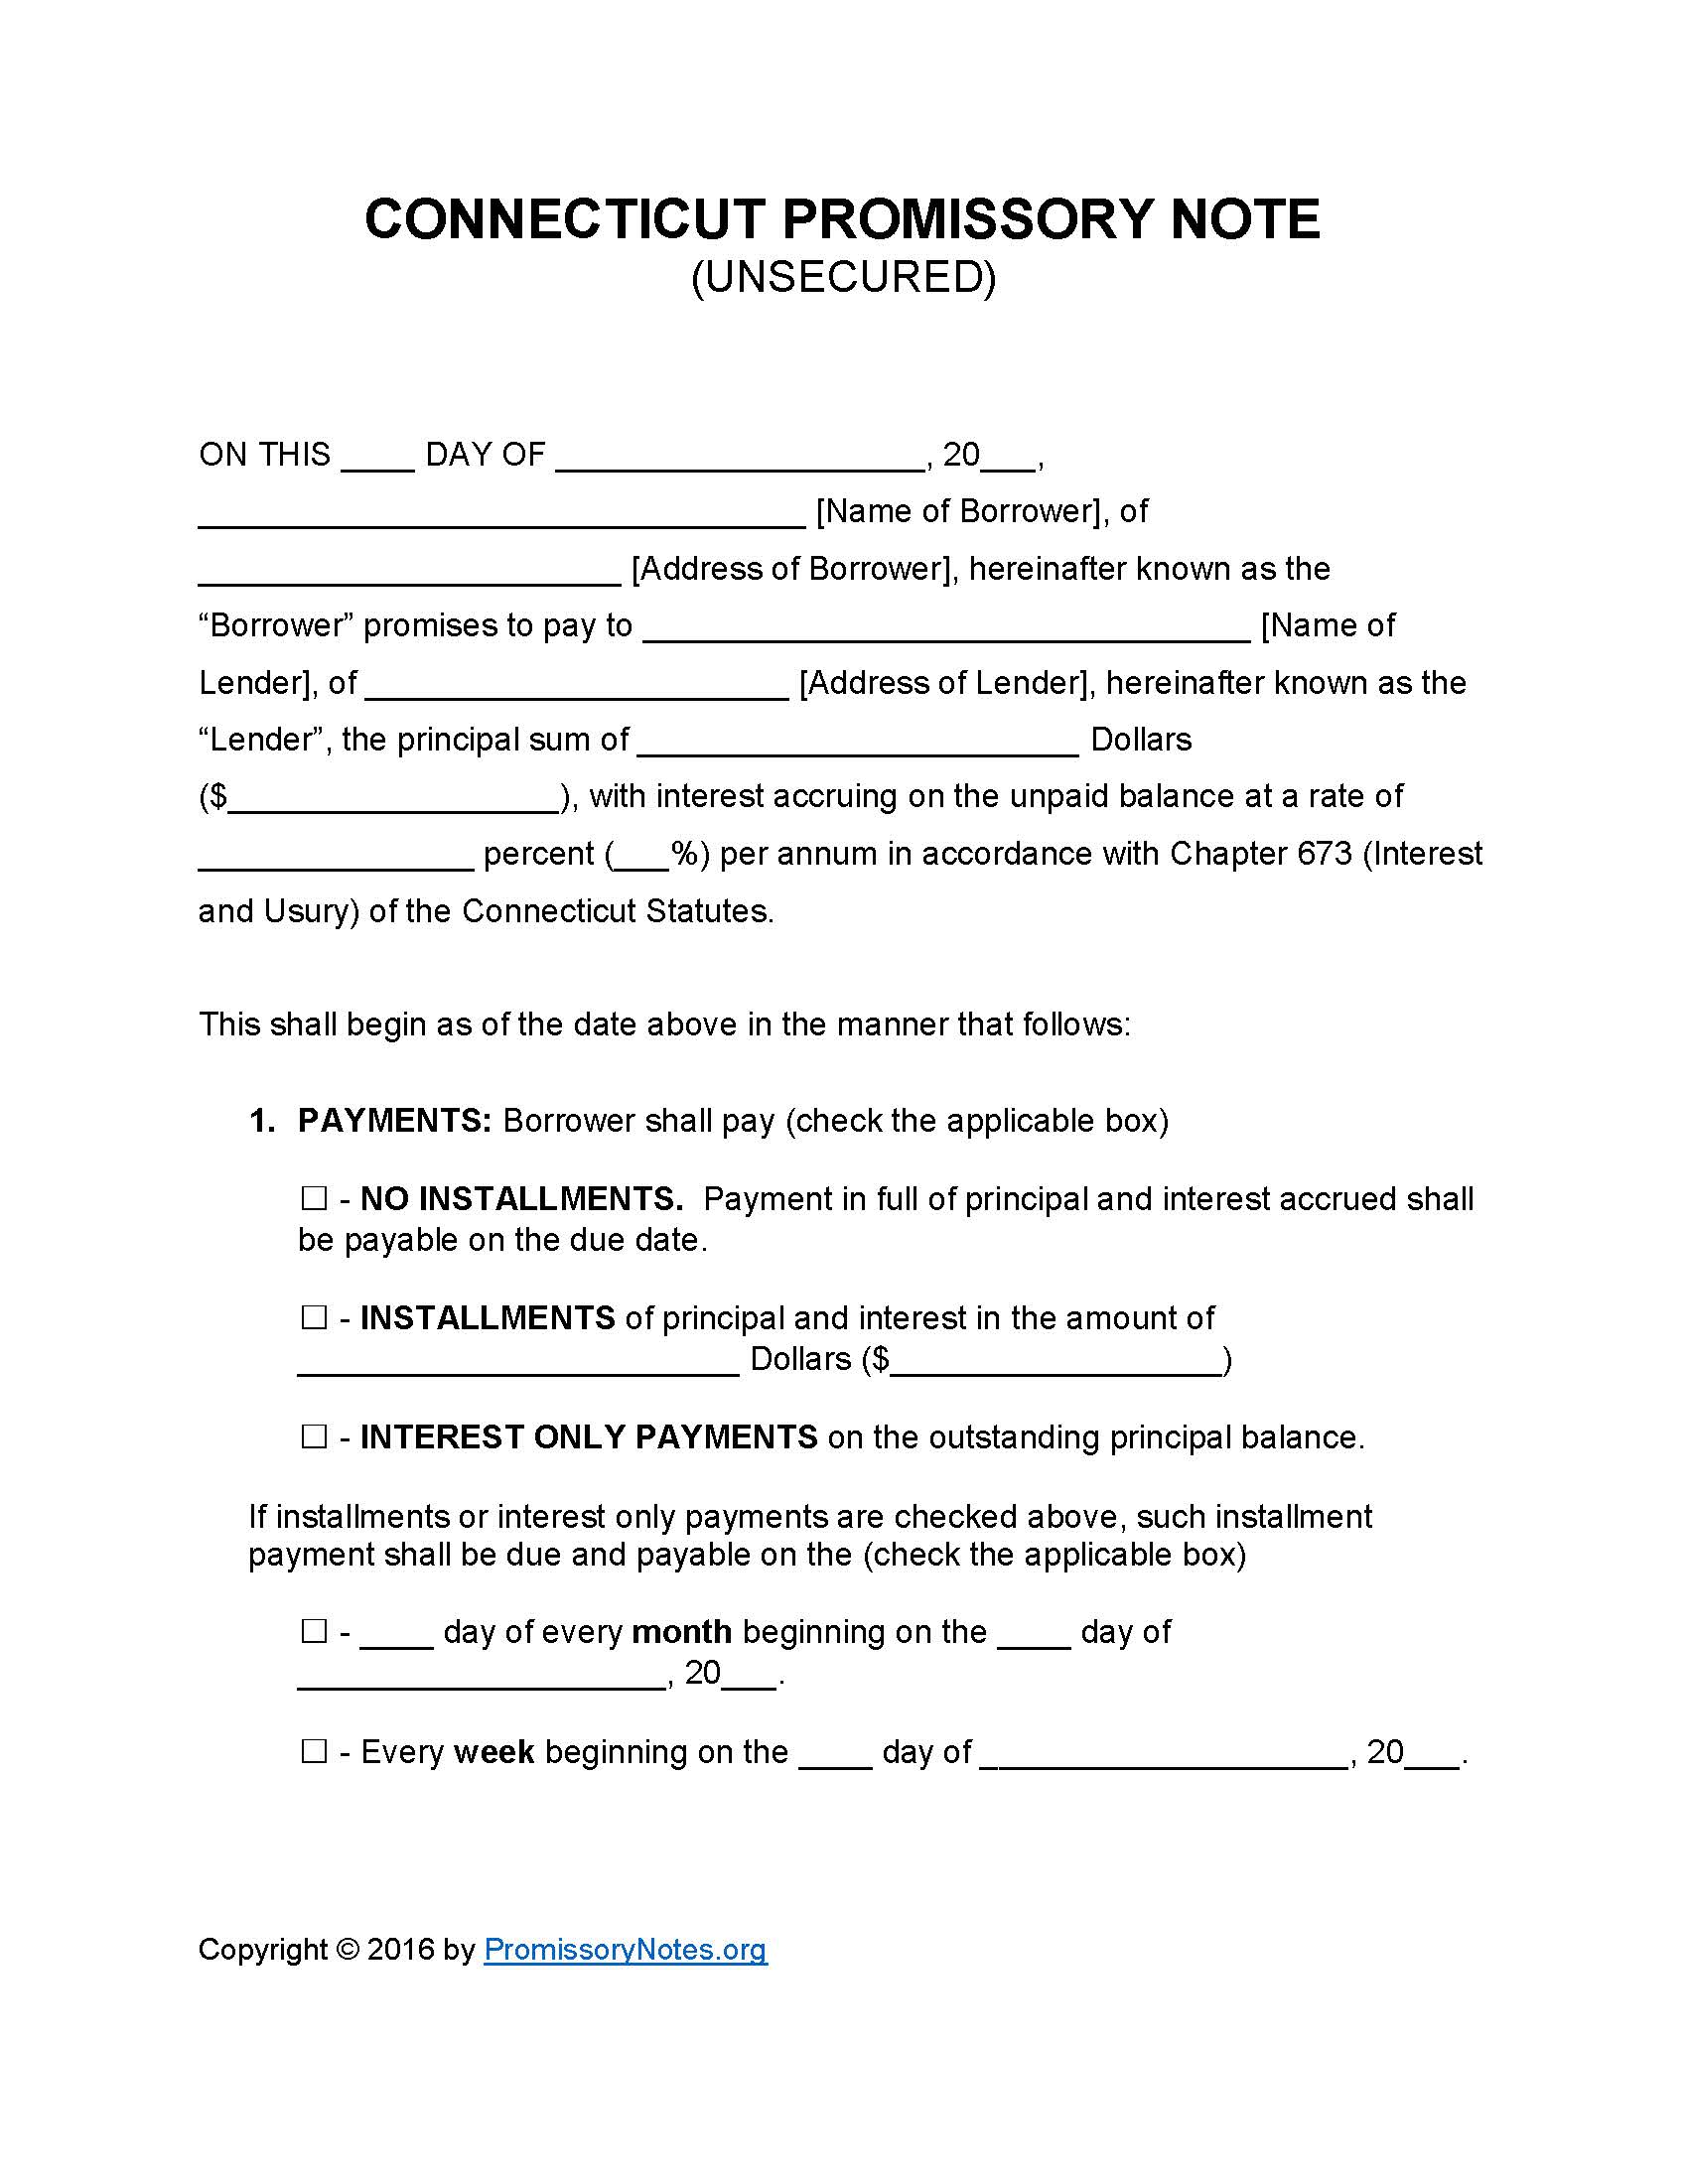 connecticut-unsecured-promissory-note-form